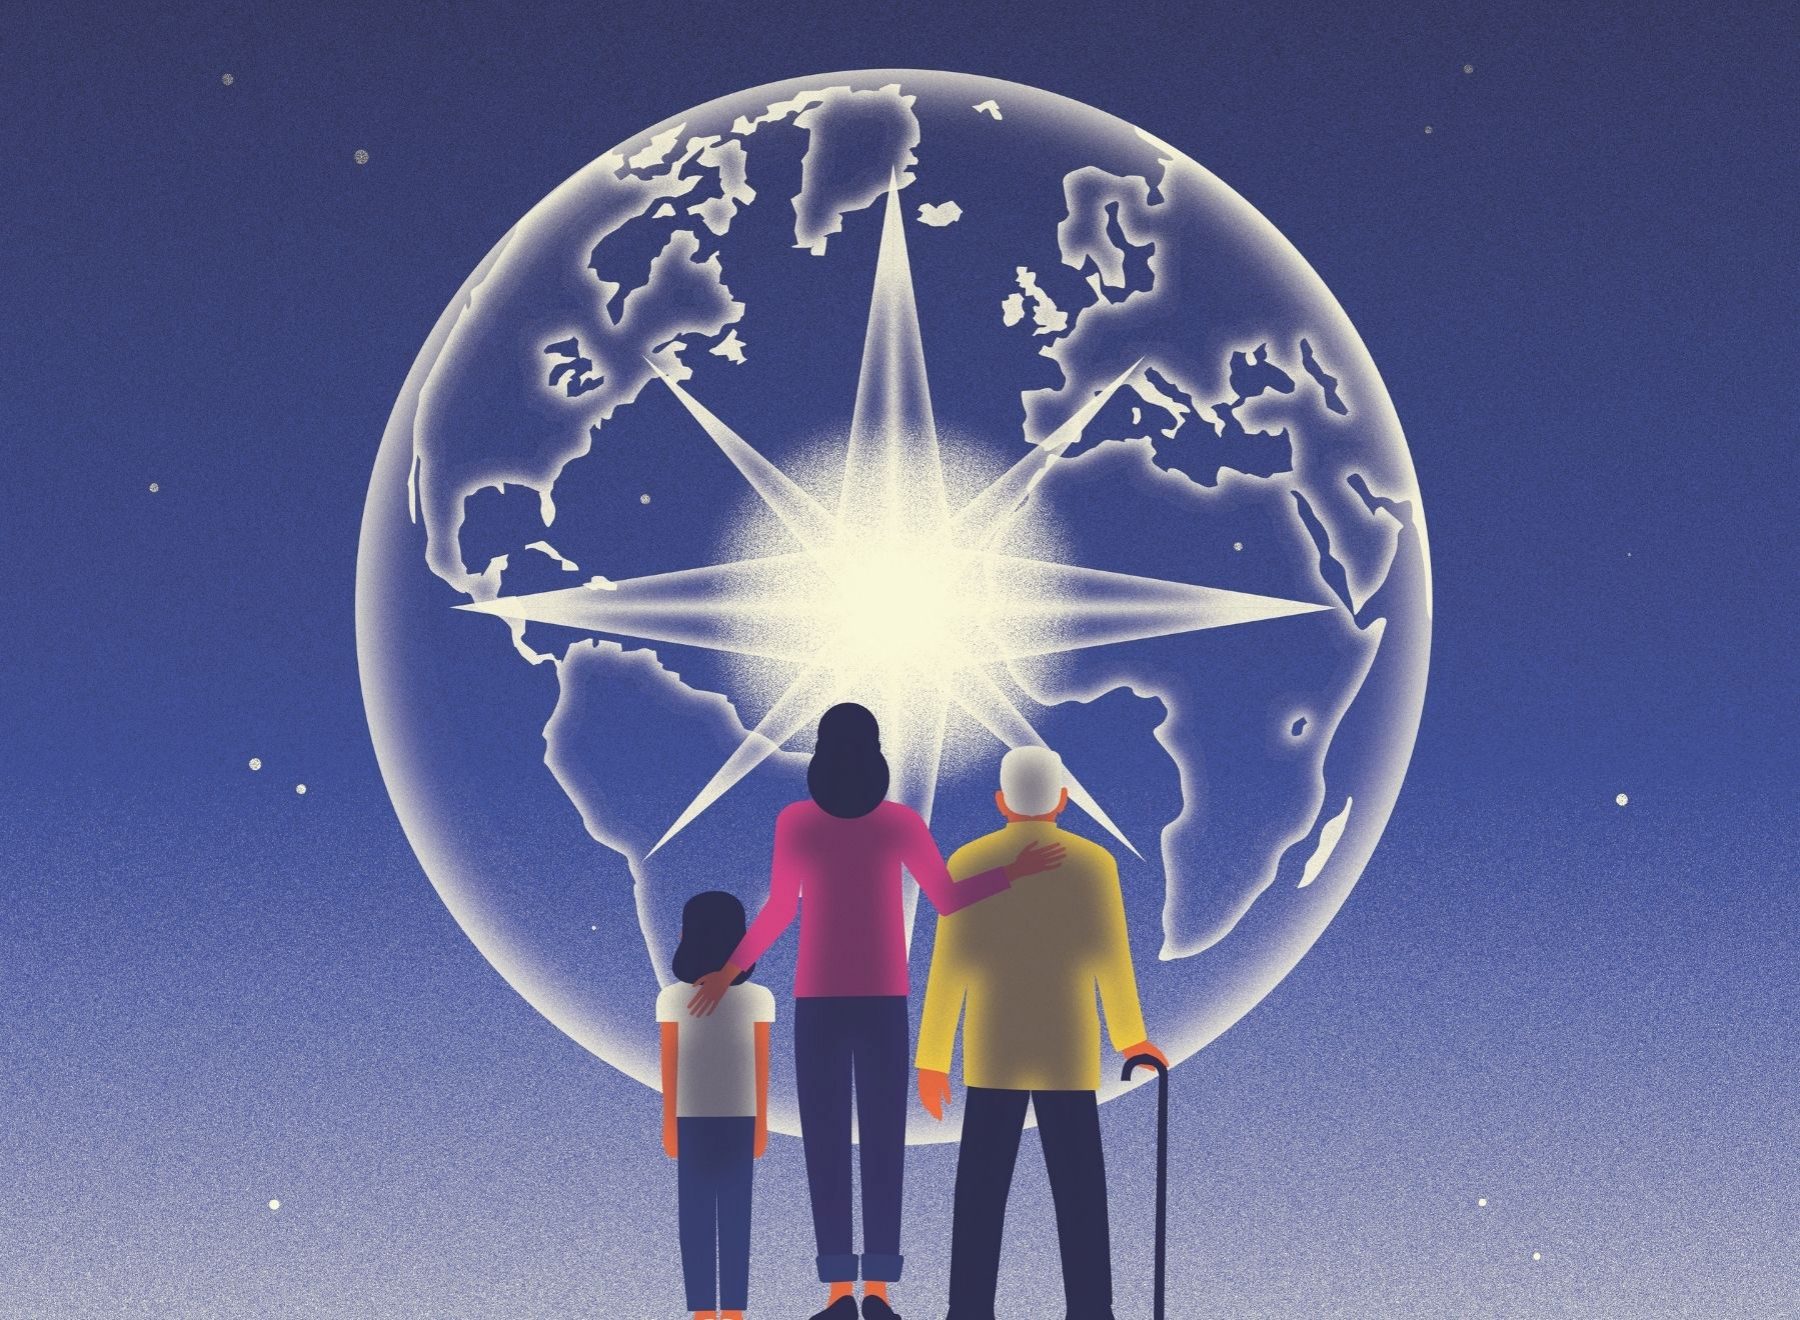 Three people, one child, one adult and one senior stand in front of an image of the earth with a bright star inside it.